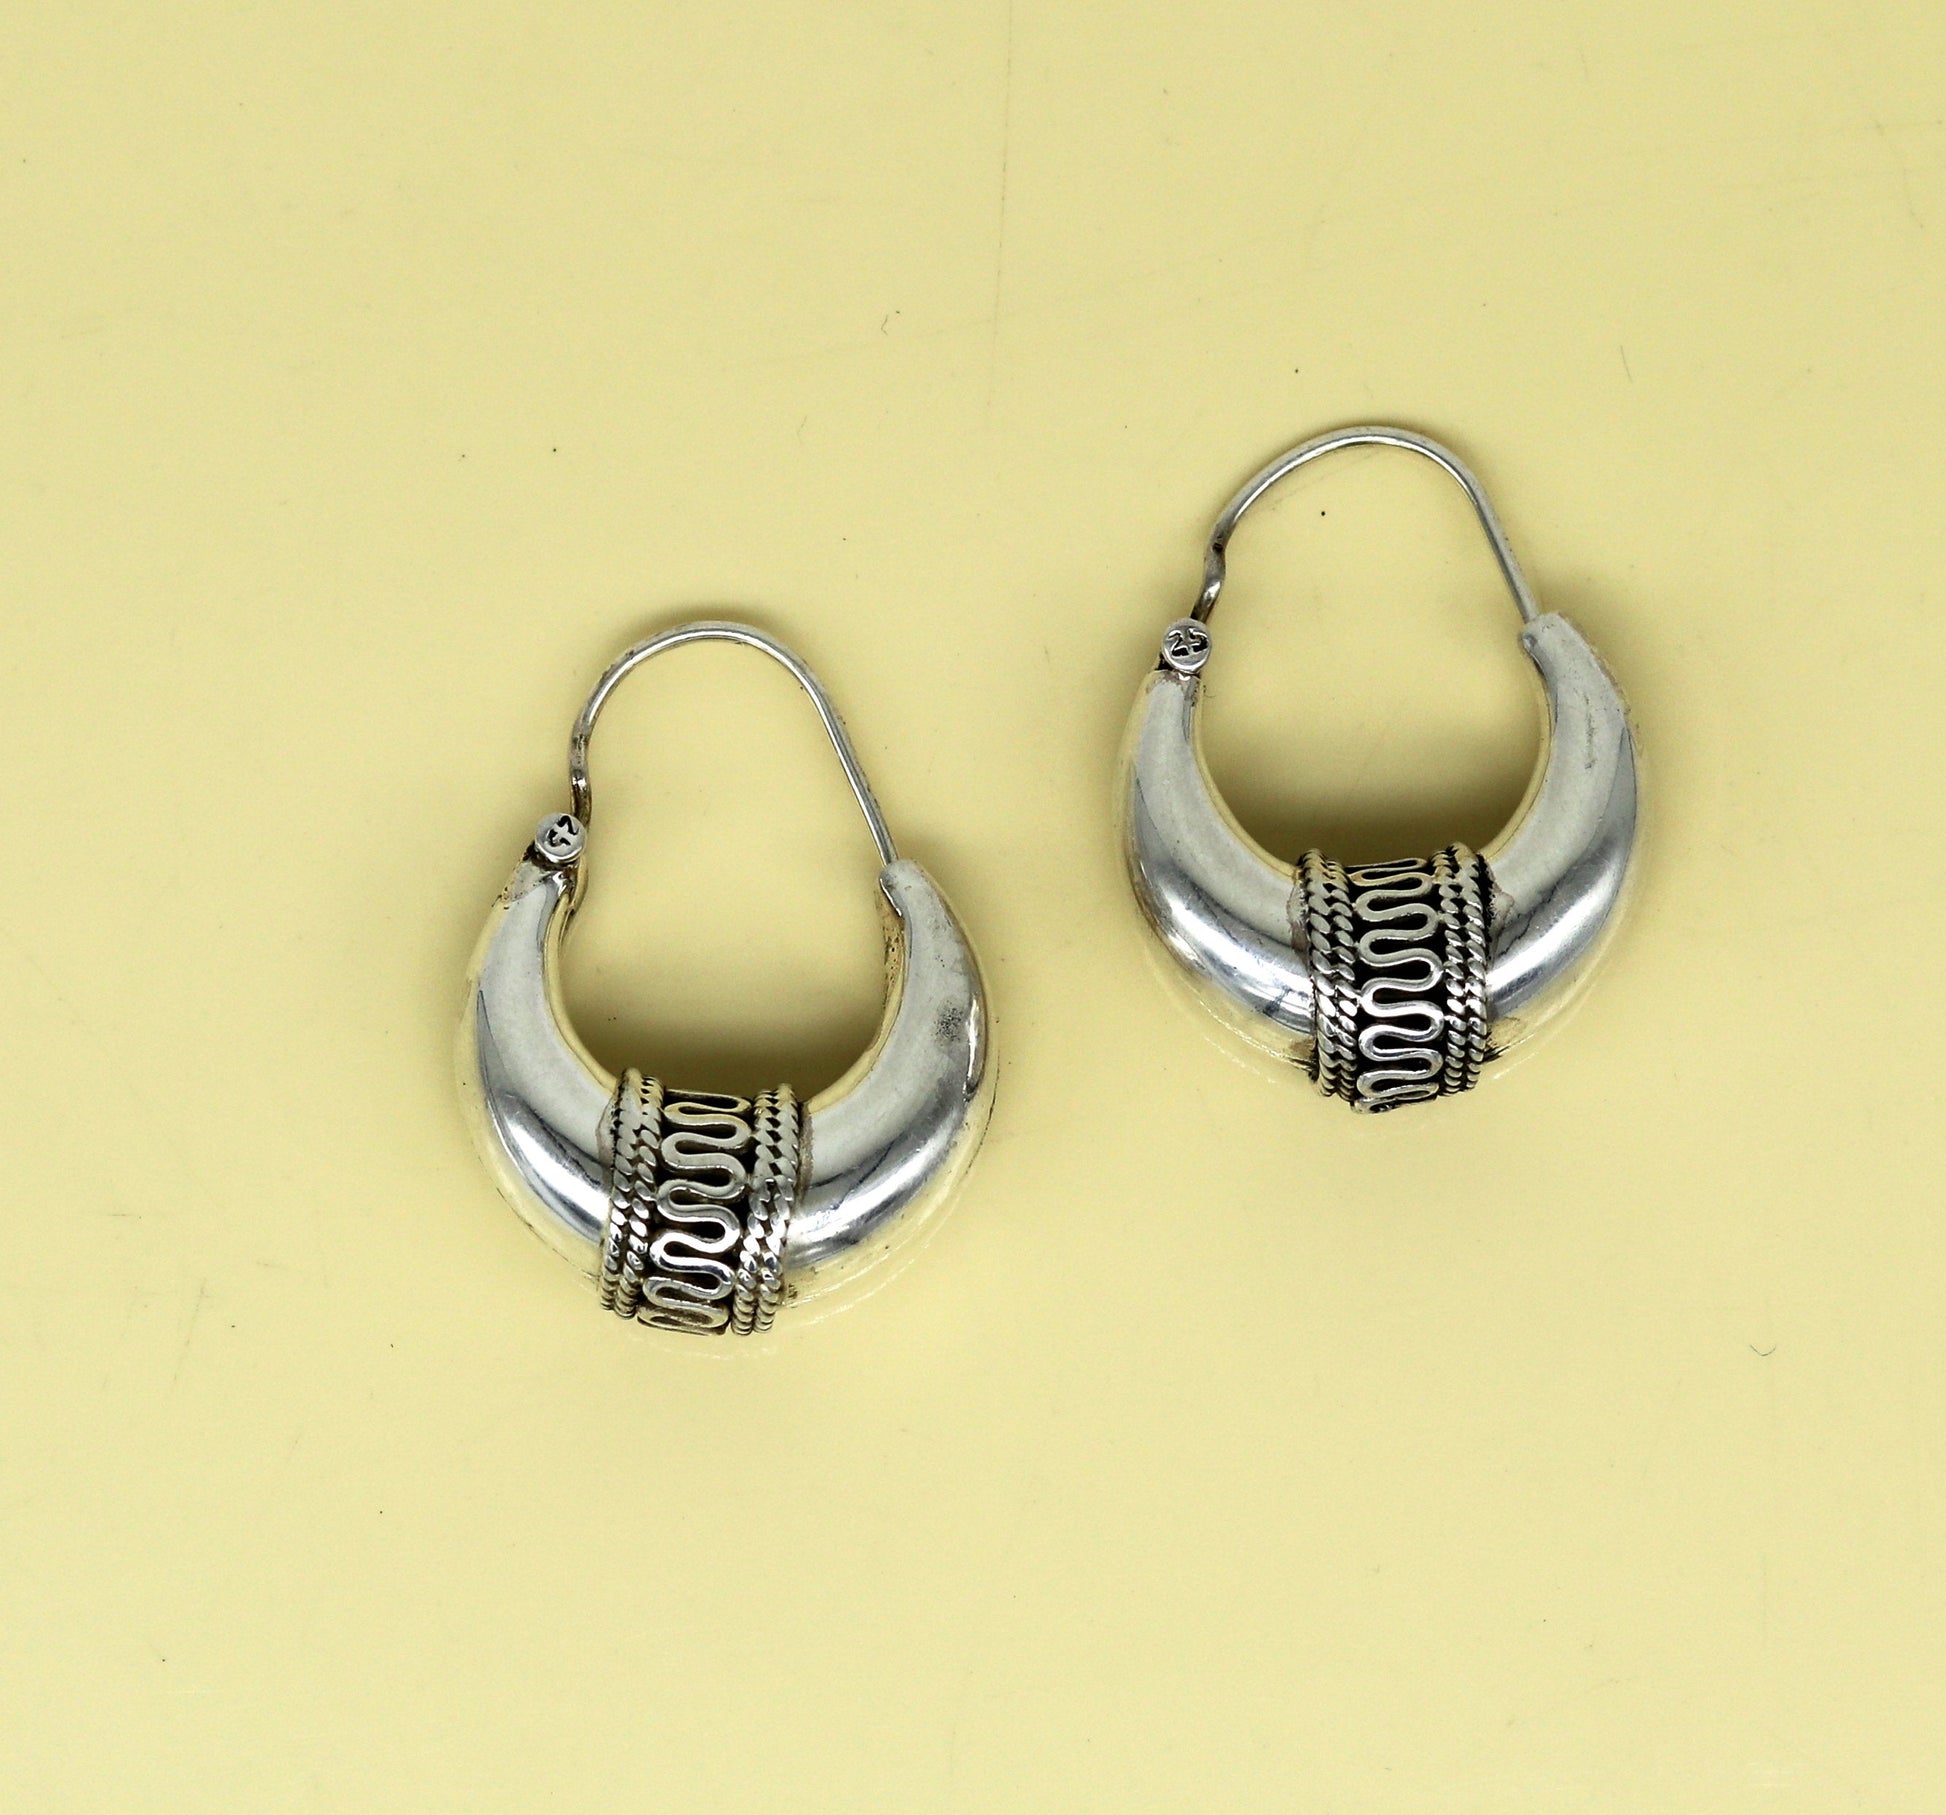 925 sterling silver handmade hoops stud earring bali, excellent customized stylish belly dance personalized gift tribal ethnic jewelry ske10 - TRIBAL ORNAMENTS